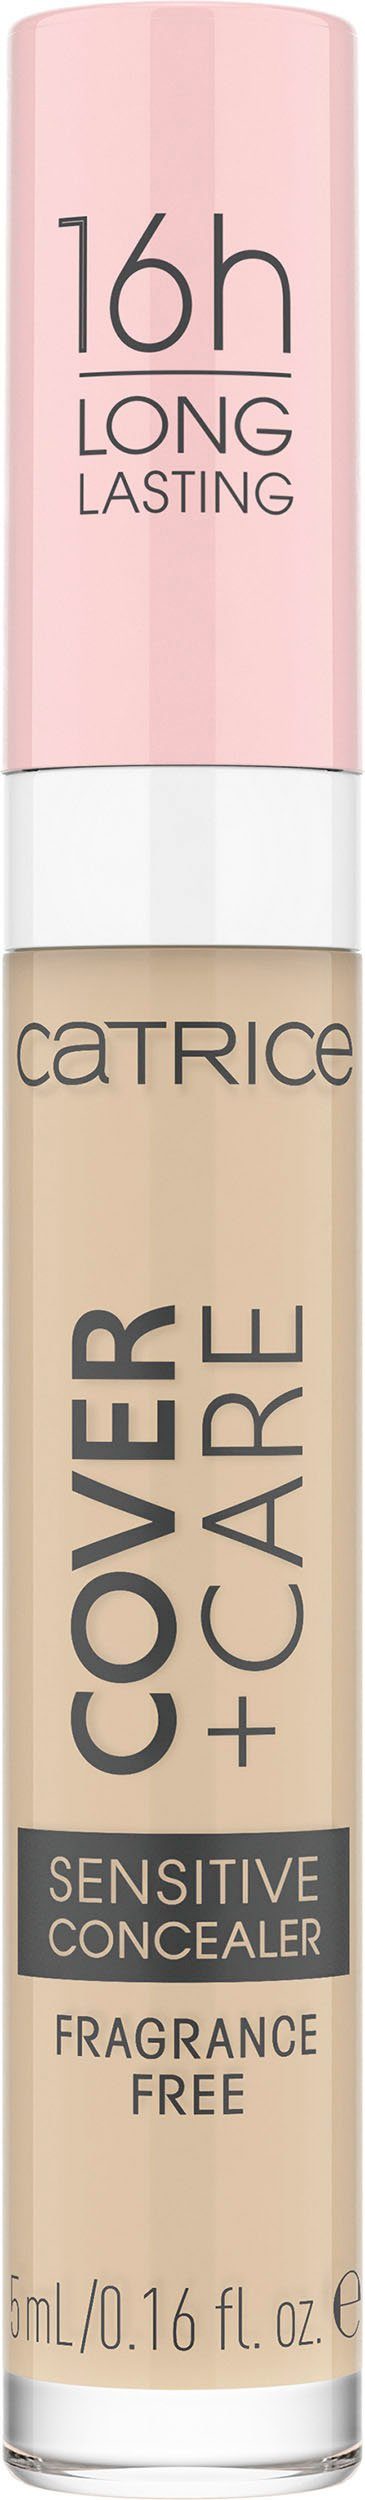 Cover Sensitive 3-tlg. nude + Catrice Concealer, Concealer 010C Care Catrice